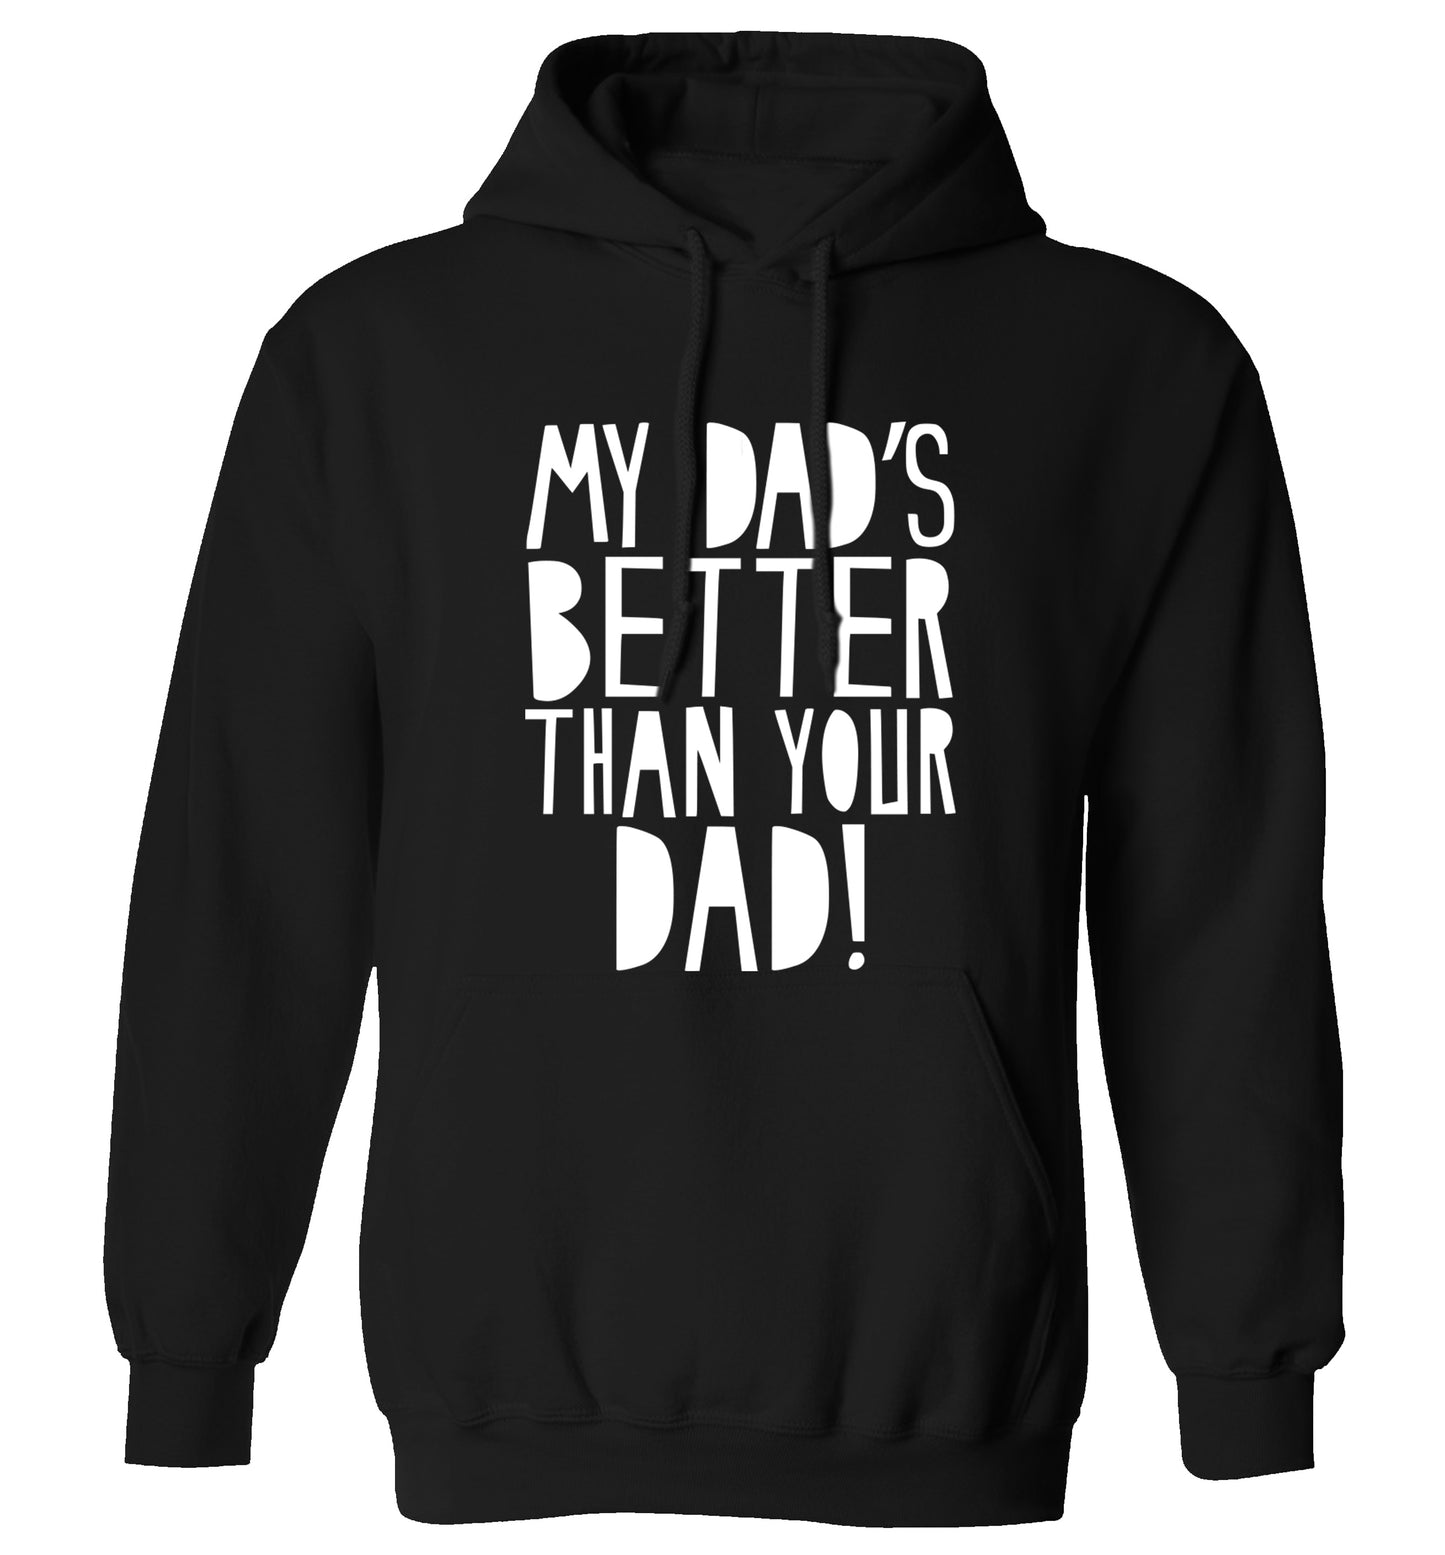 My dad's better than your dad adults unisex black hoodie 2XL